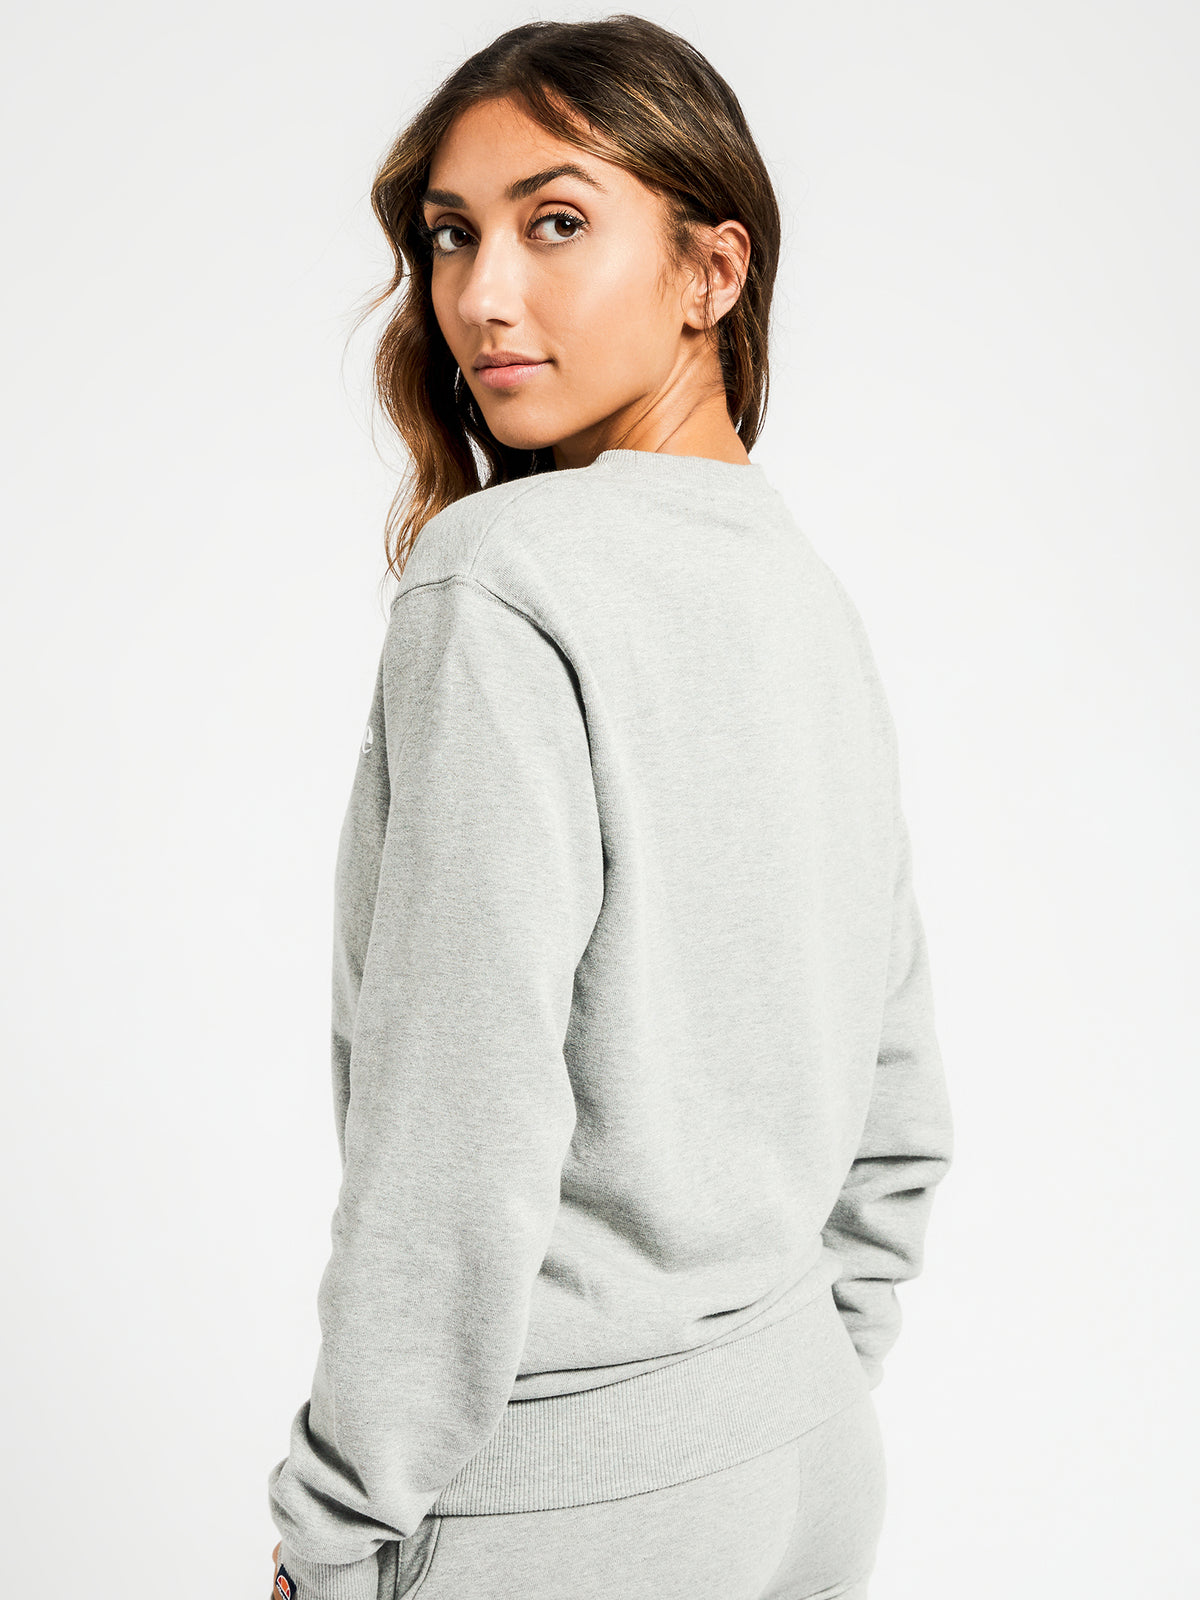 Triome Crew Sweater in Grey Marle